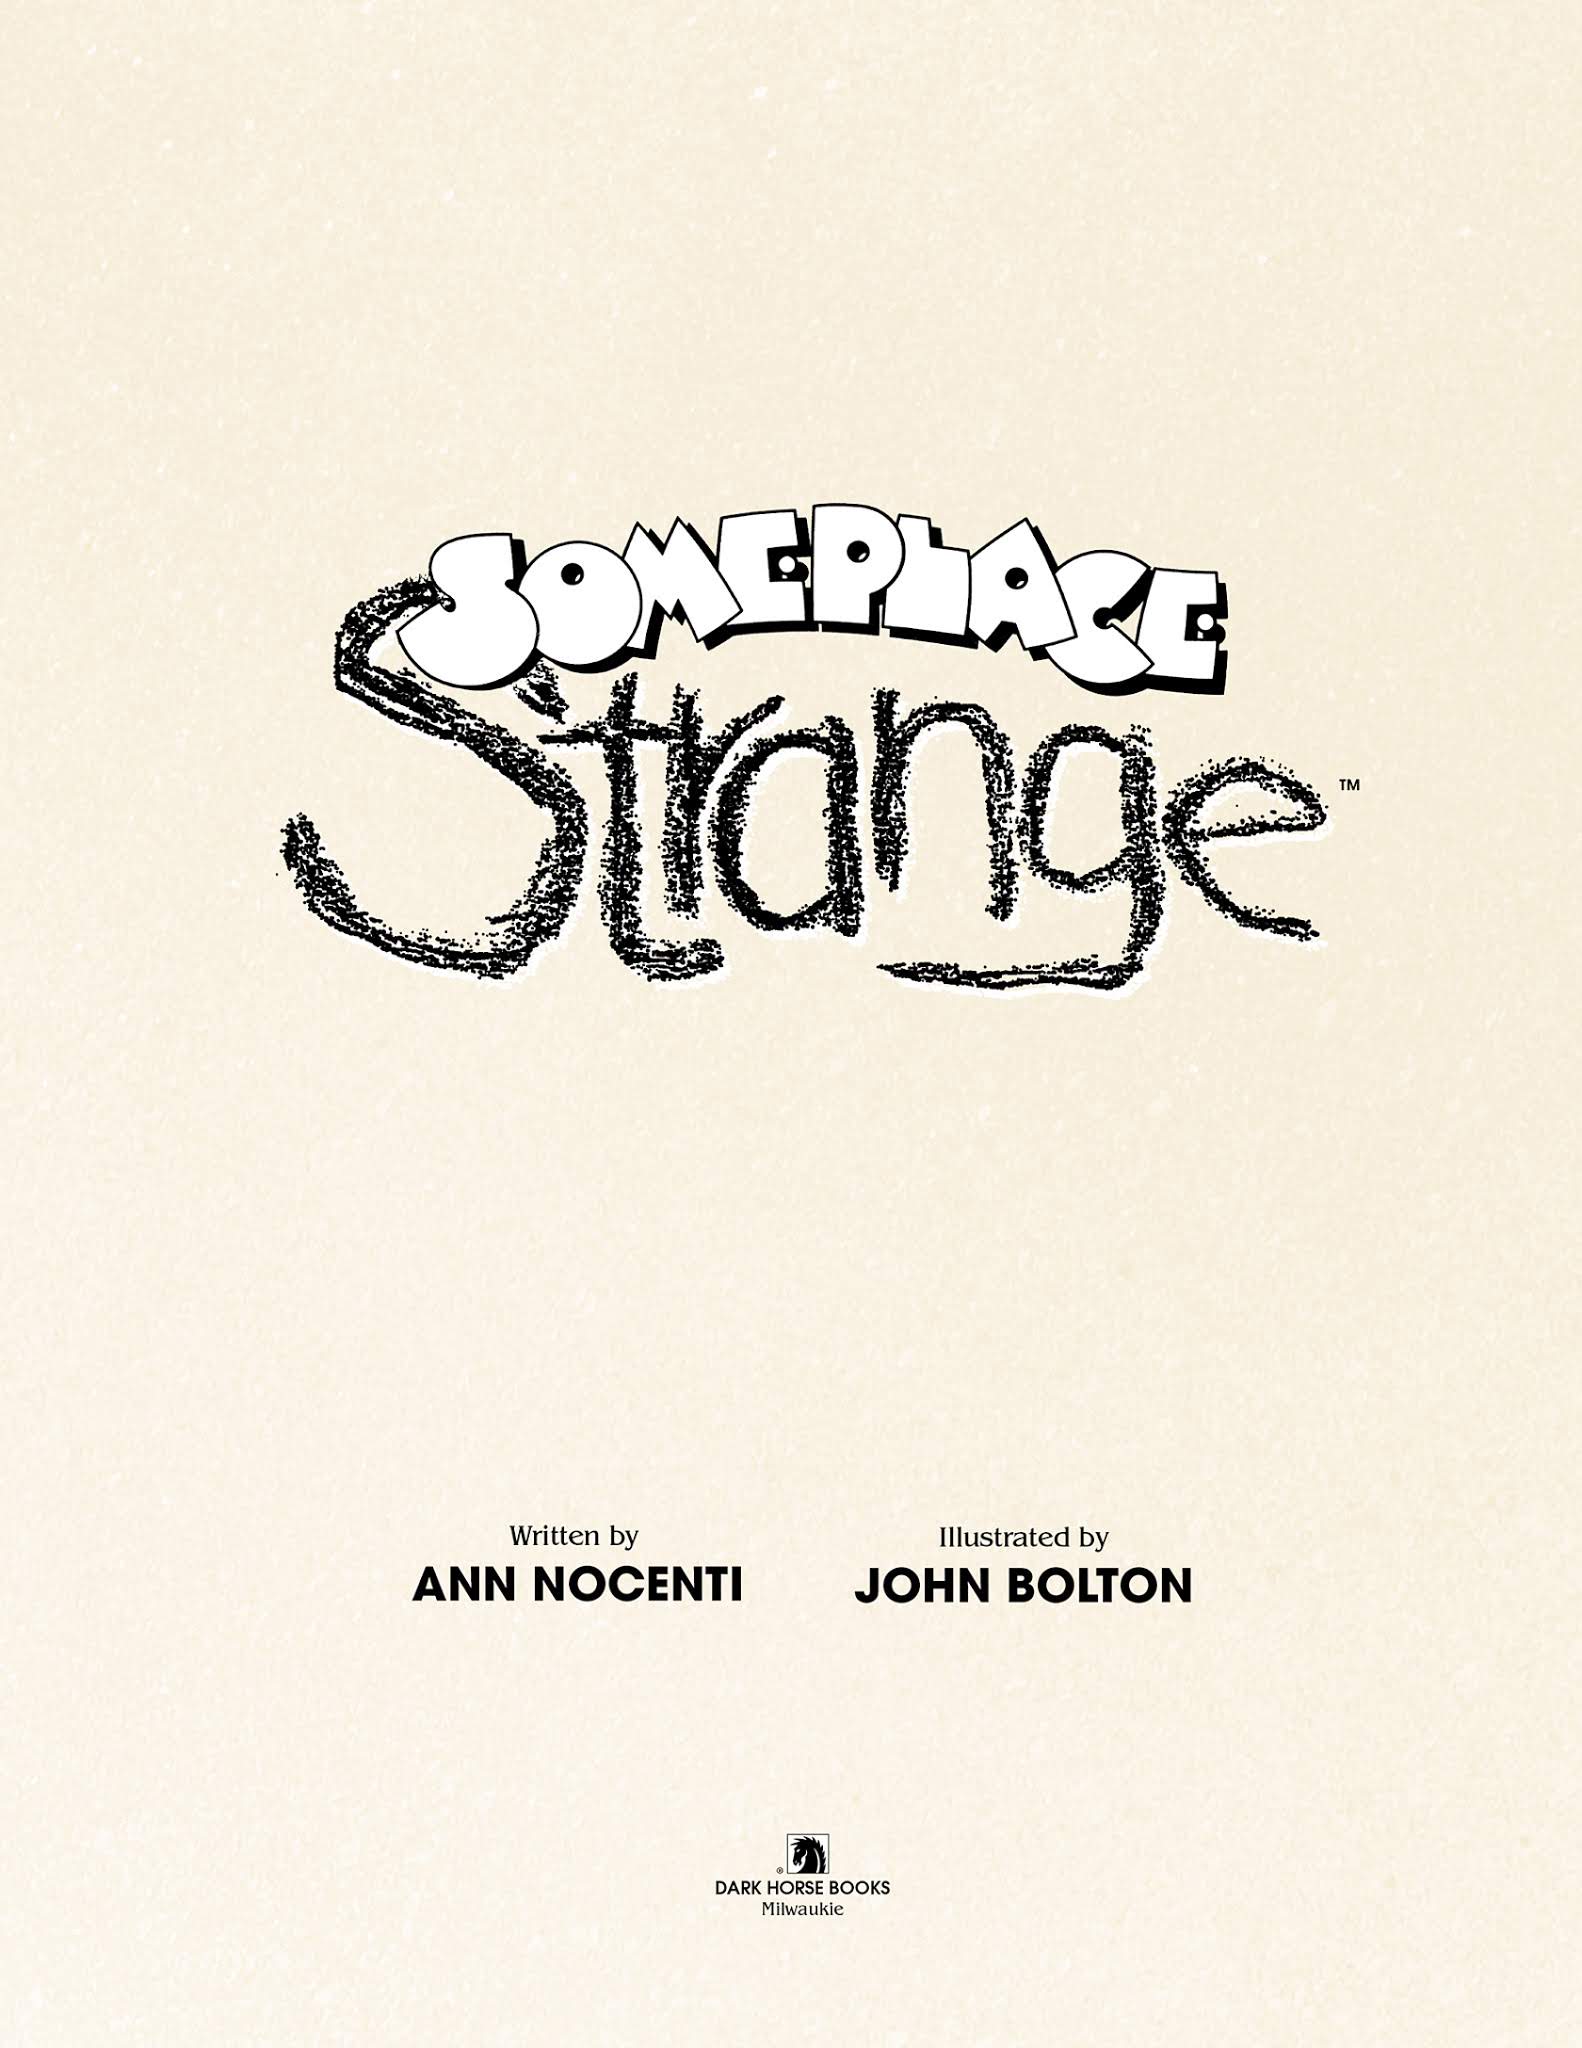 Read online Someplace Strange comic -  Issue # TPB - 3